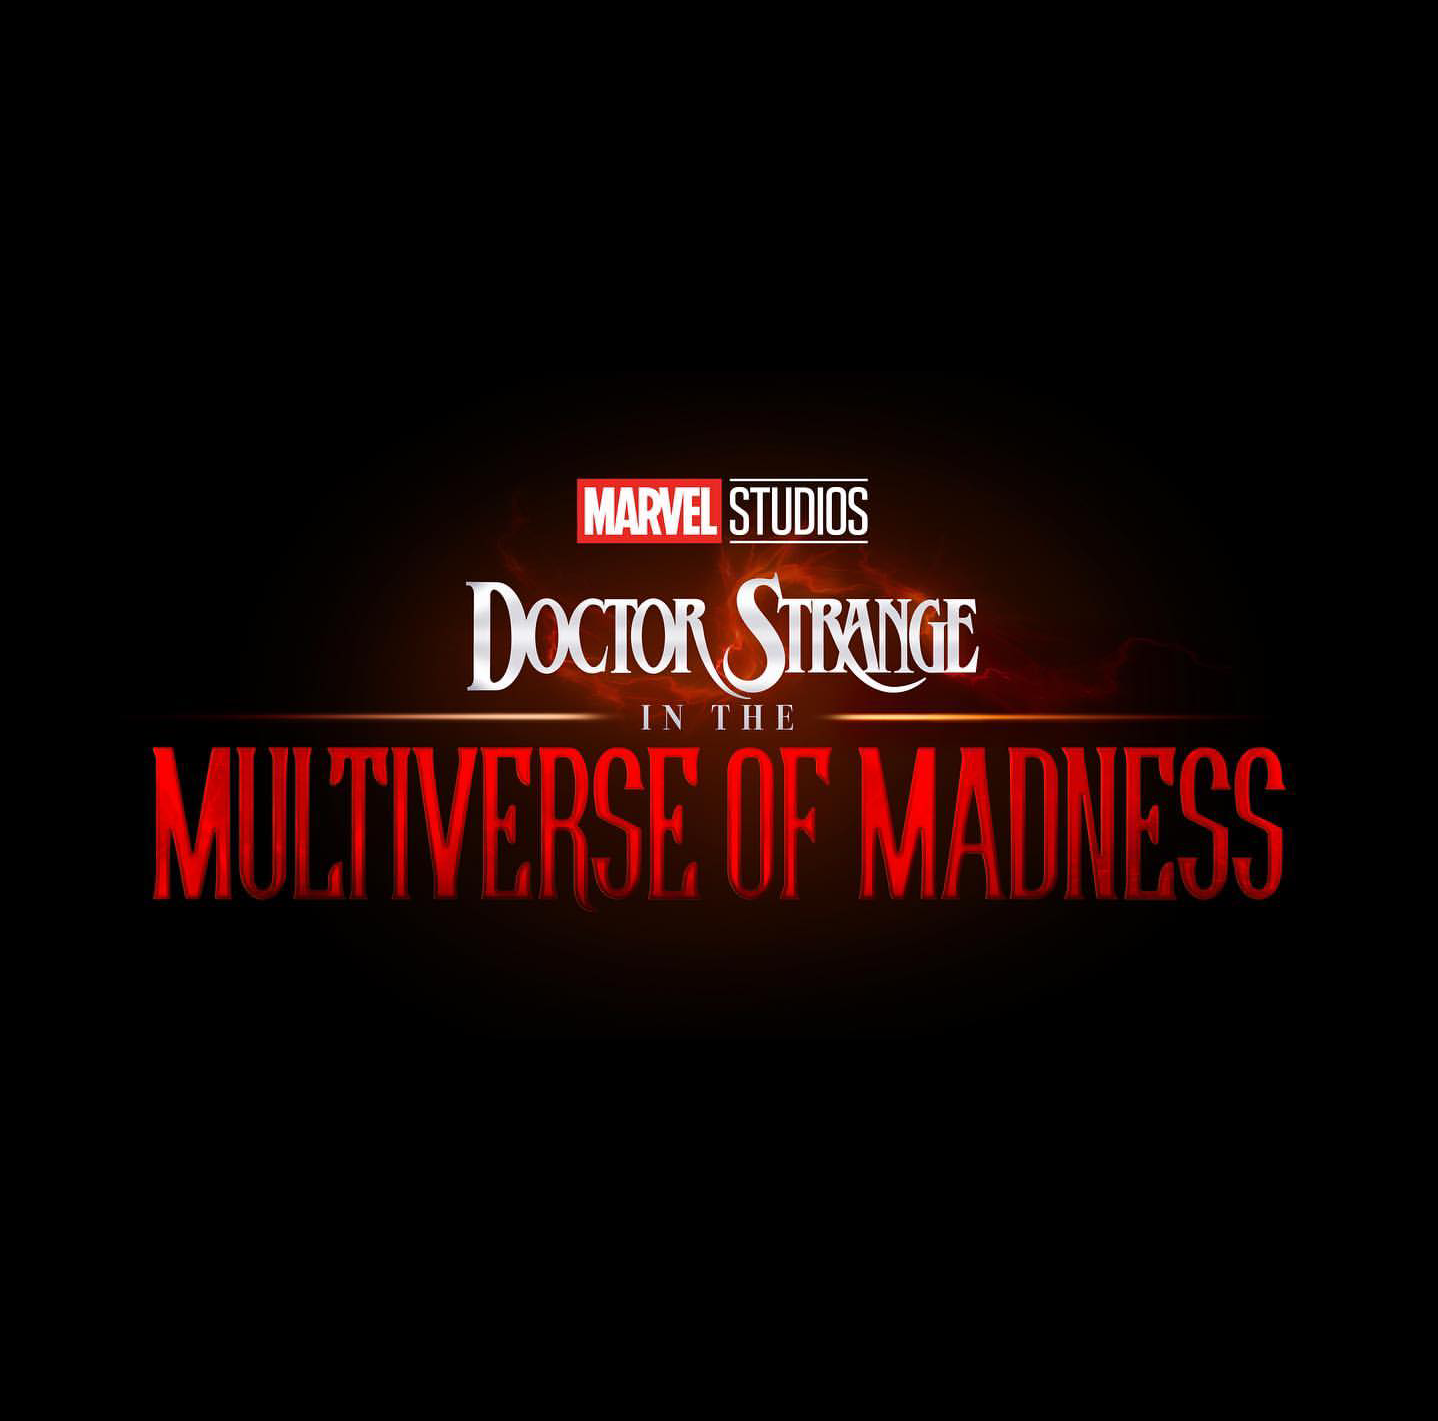 Sex marveladdicts:Marvel phase 4 (and 5) news: pictures